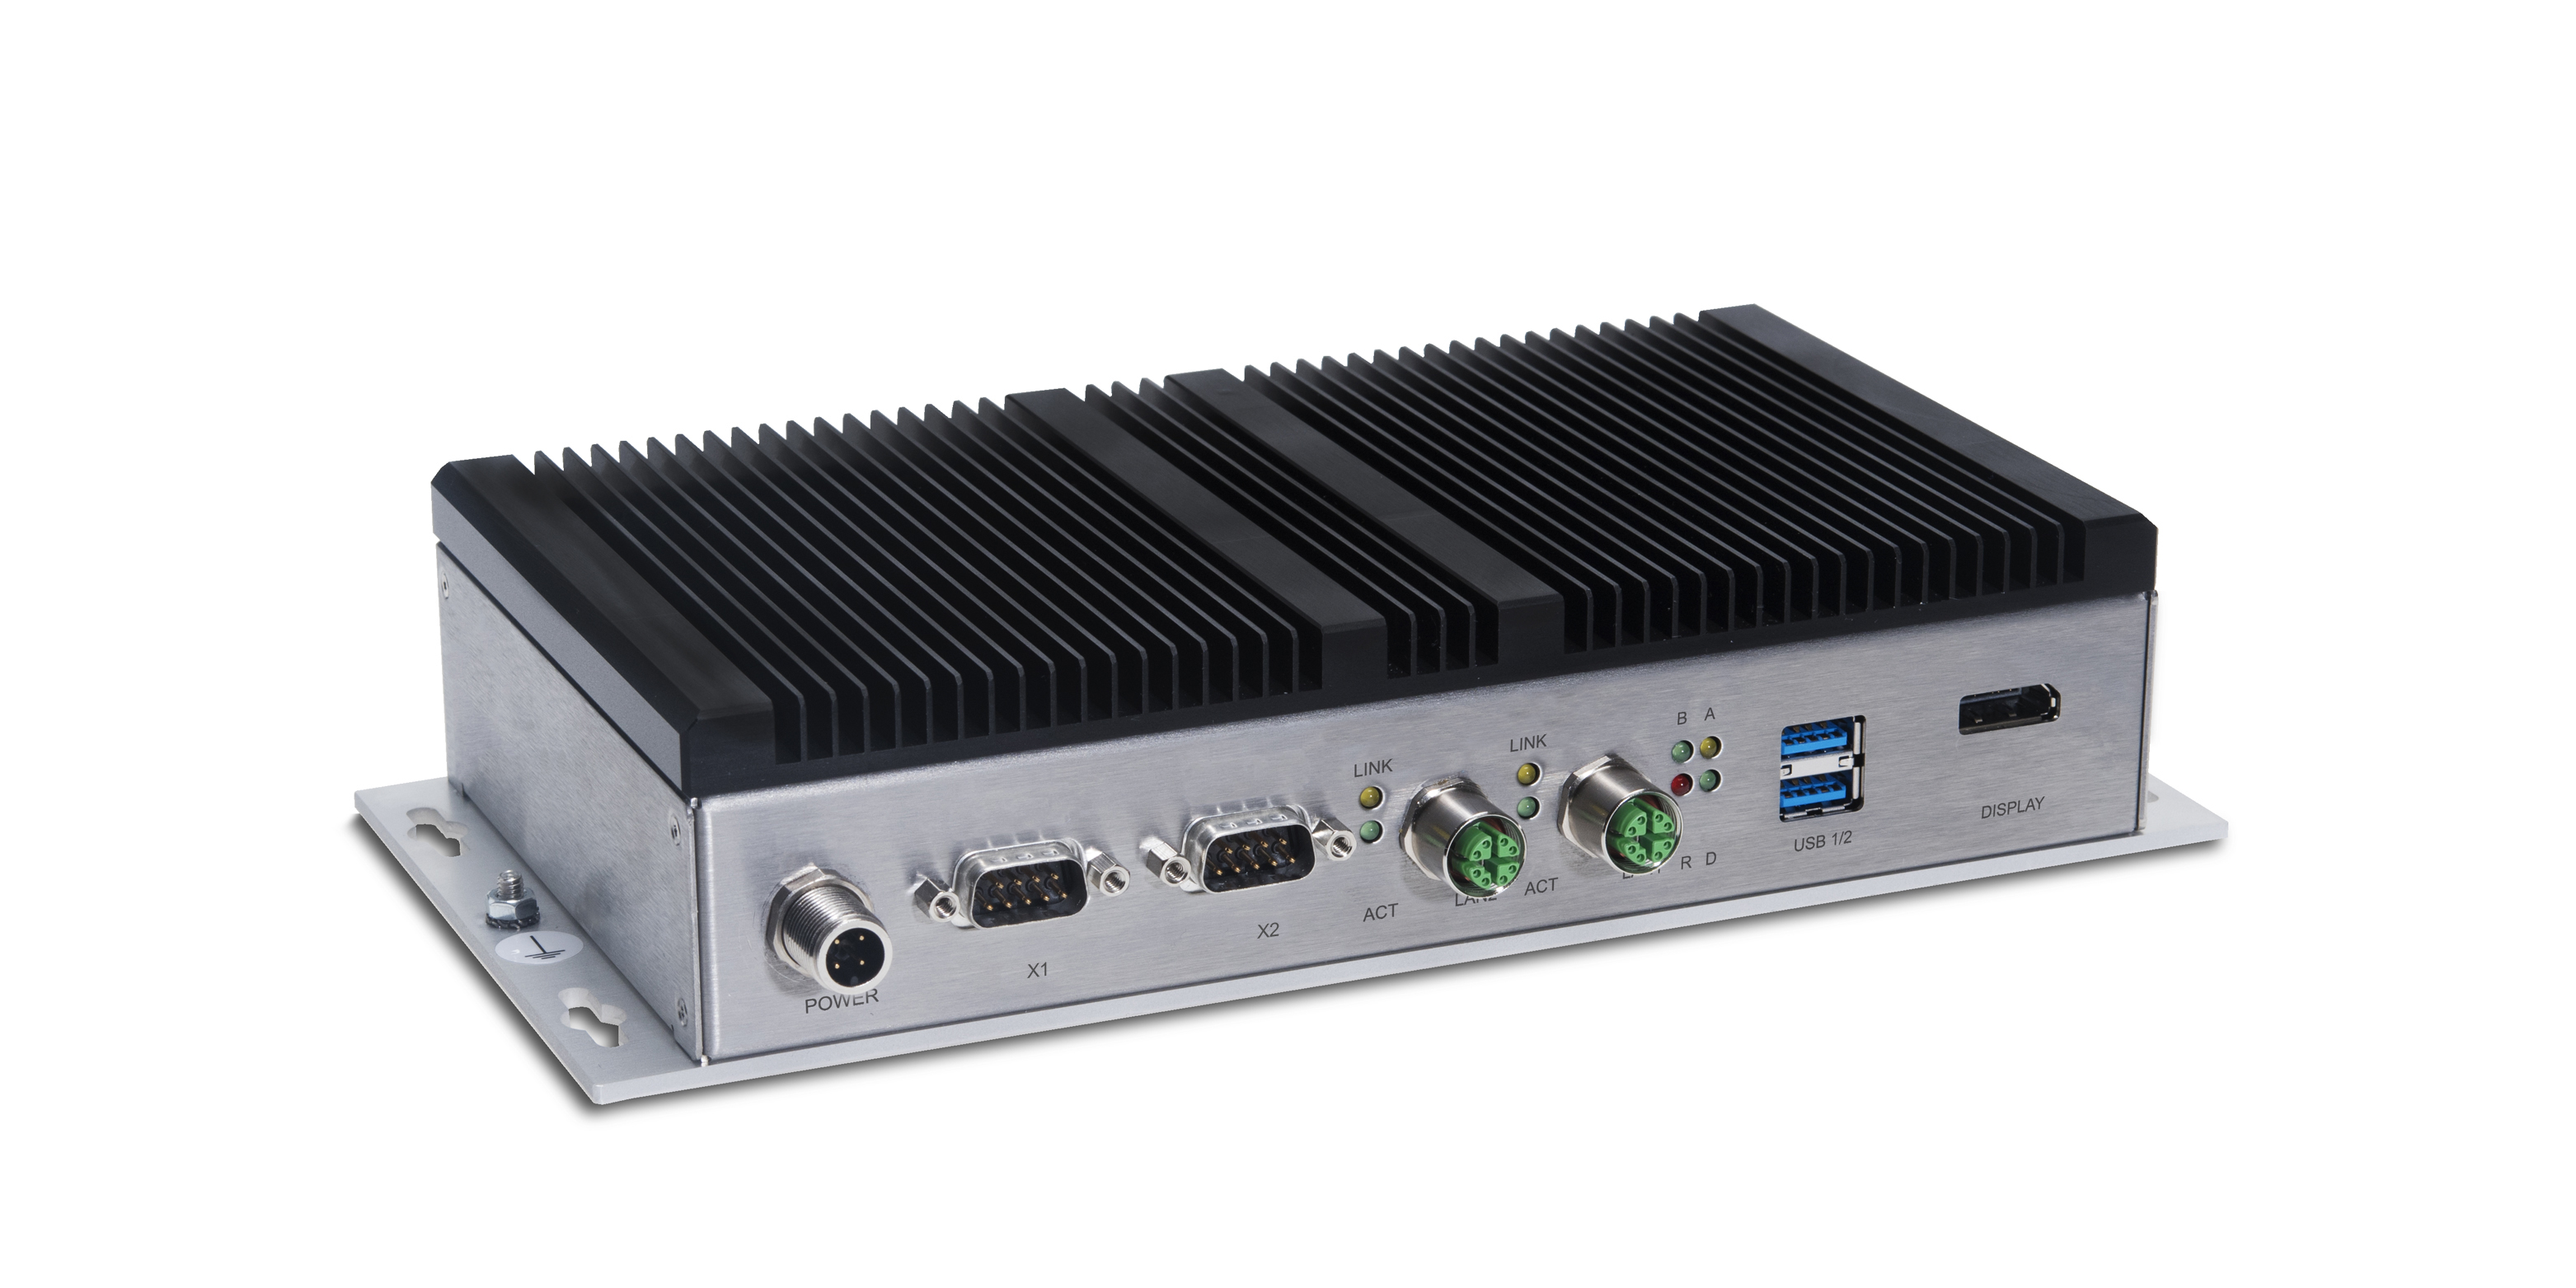 Embedded PC RSL 81 for railway use